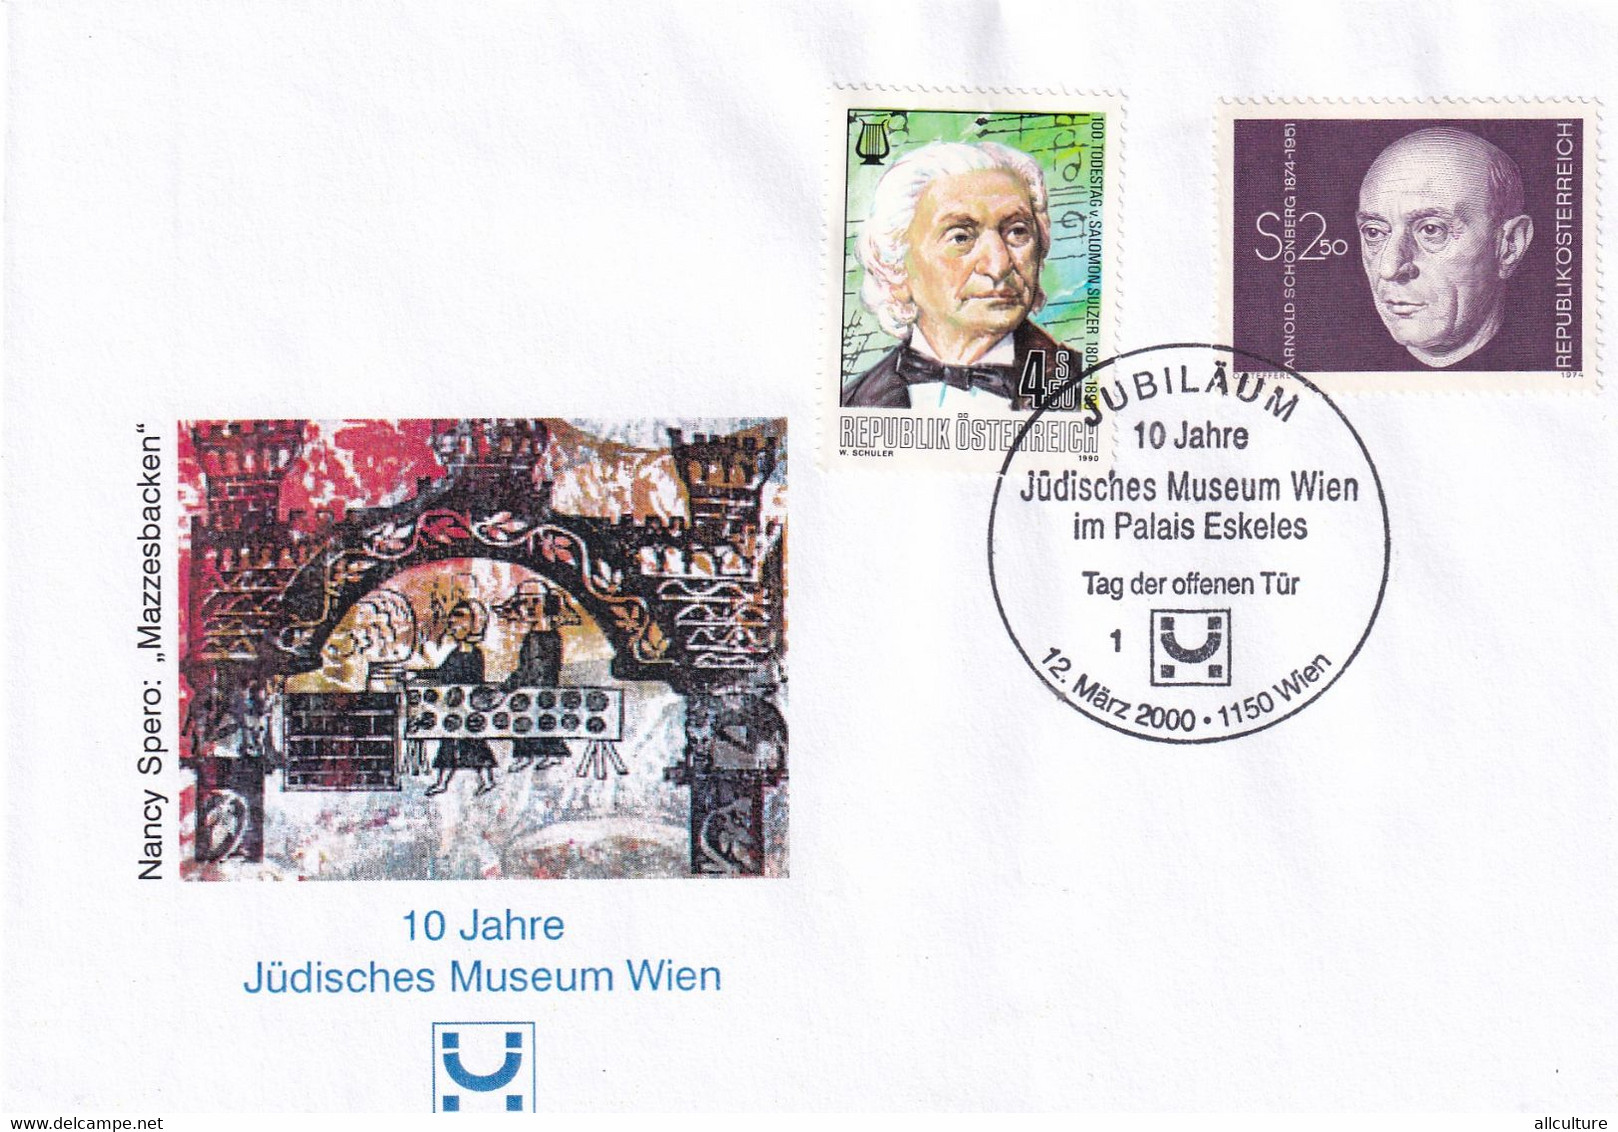 A8407- ERSTTAG,10 YEARS ANNIVERSARY OF JEWISH MUSEUM VIENNA REPUBLIK OESTERREICH AUSTRIA WIEN 2000 USED STAMP ON COVER - Covers & Documents